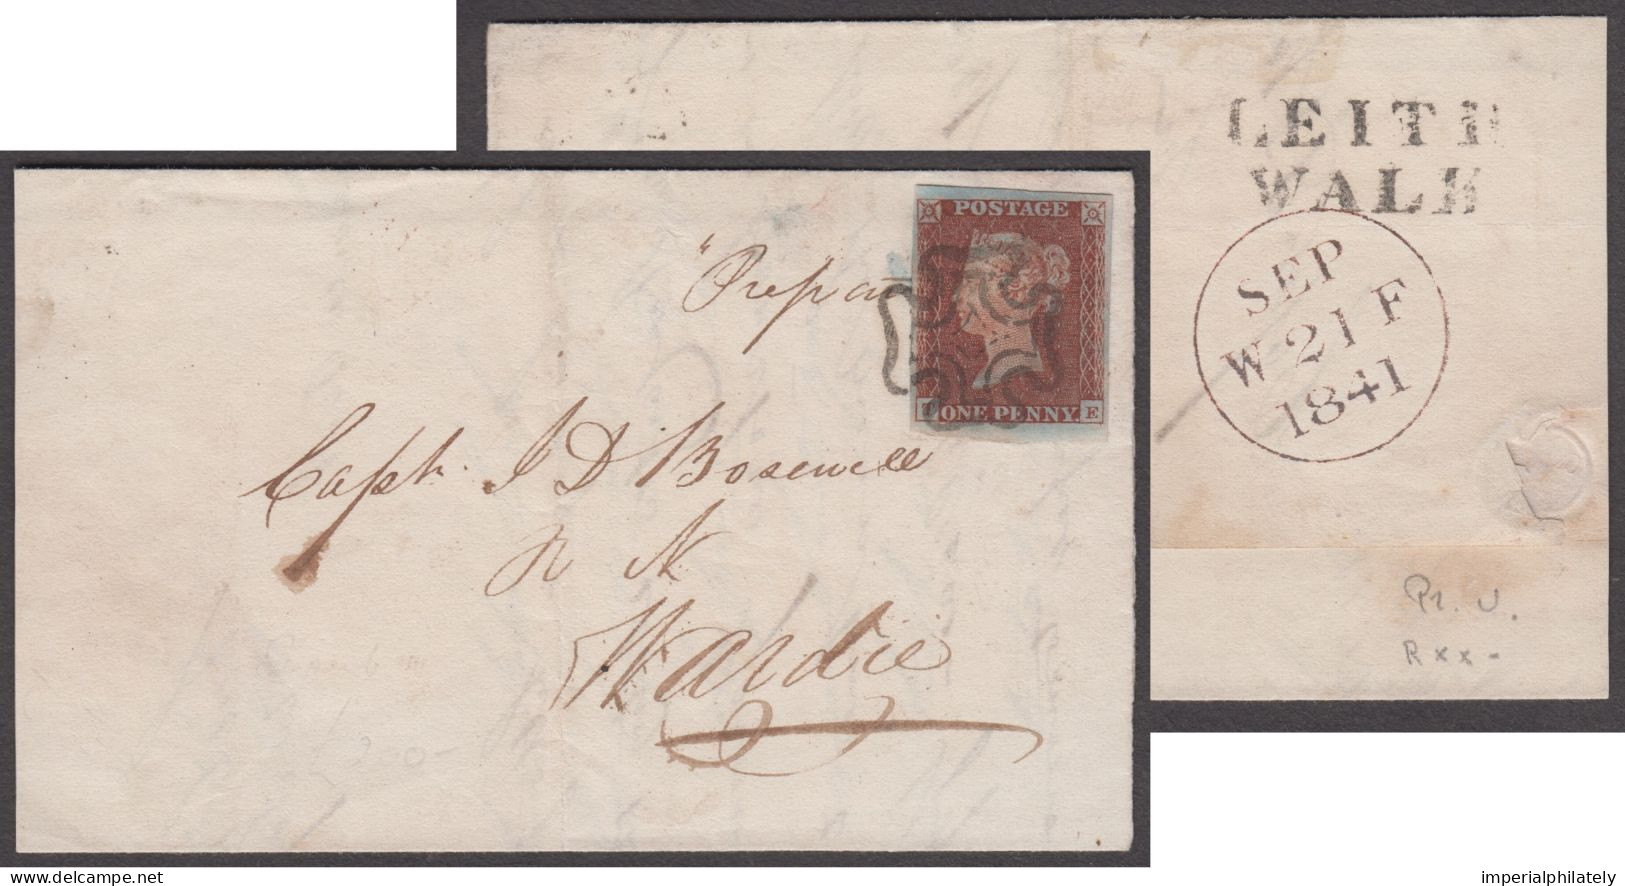 1841 1d Red Plate 11 TE (from The Black Plate), Fine To Huge Margins, Tied By Crisp Black MC On Wrapper (Scotland) - Storia Postale